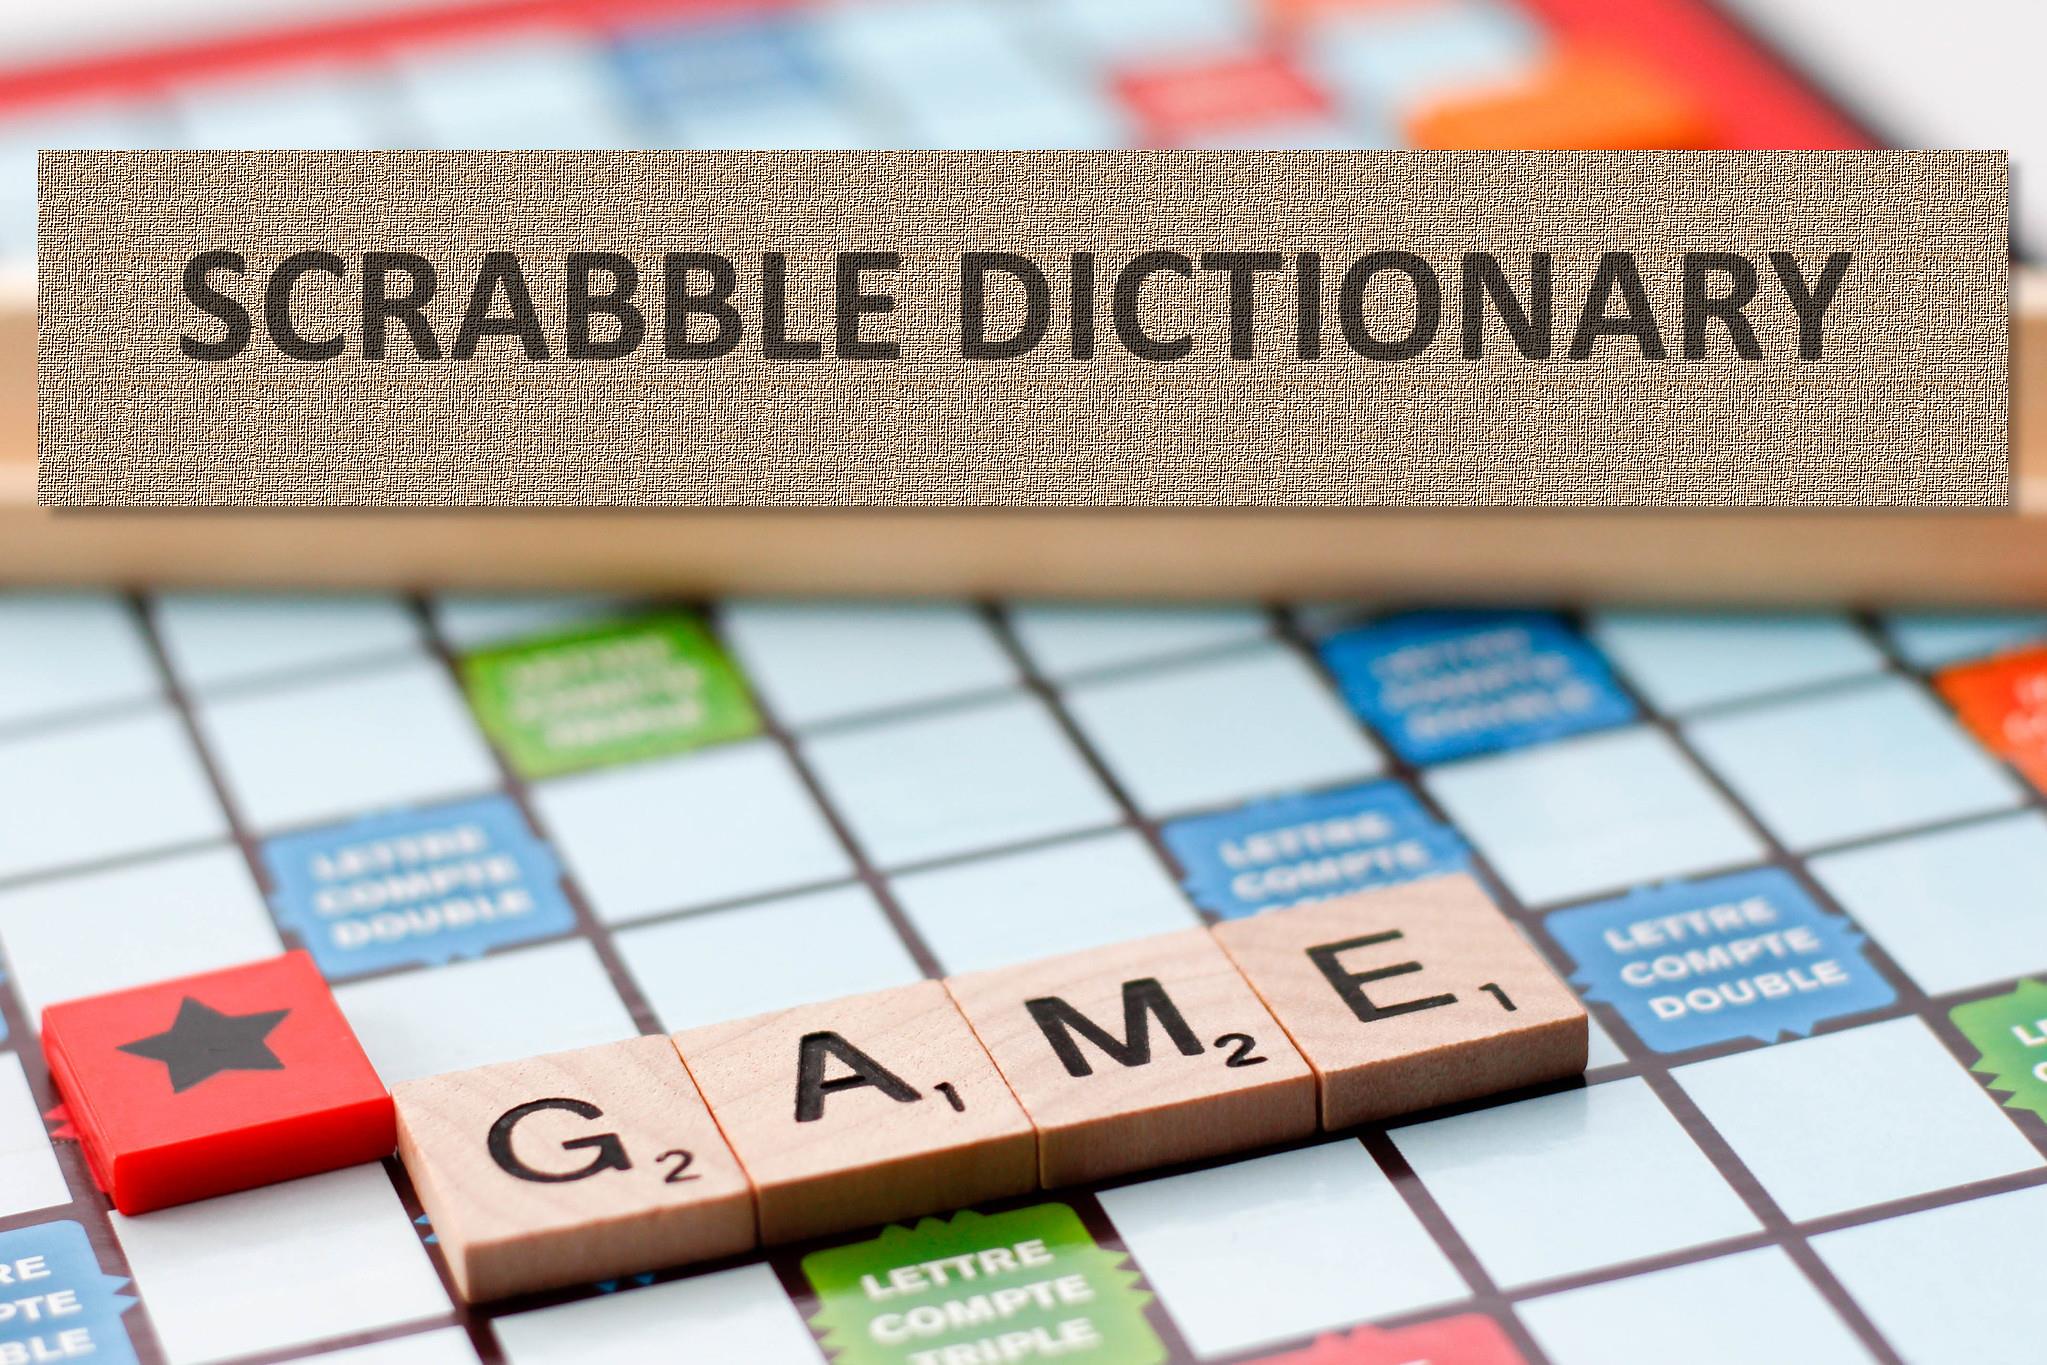 words-from-letters-scrabble-dictionary-poocoo-dictionary-for-scrabble-word-with-friends